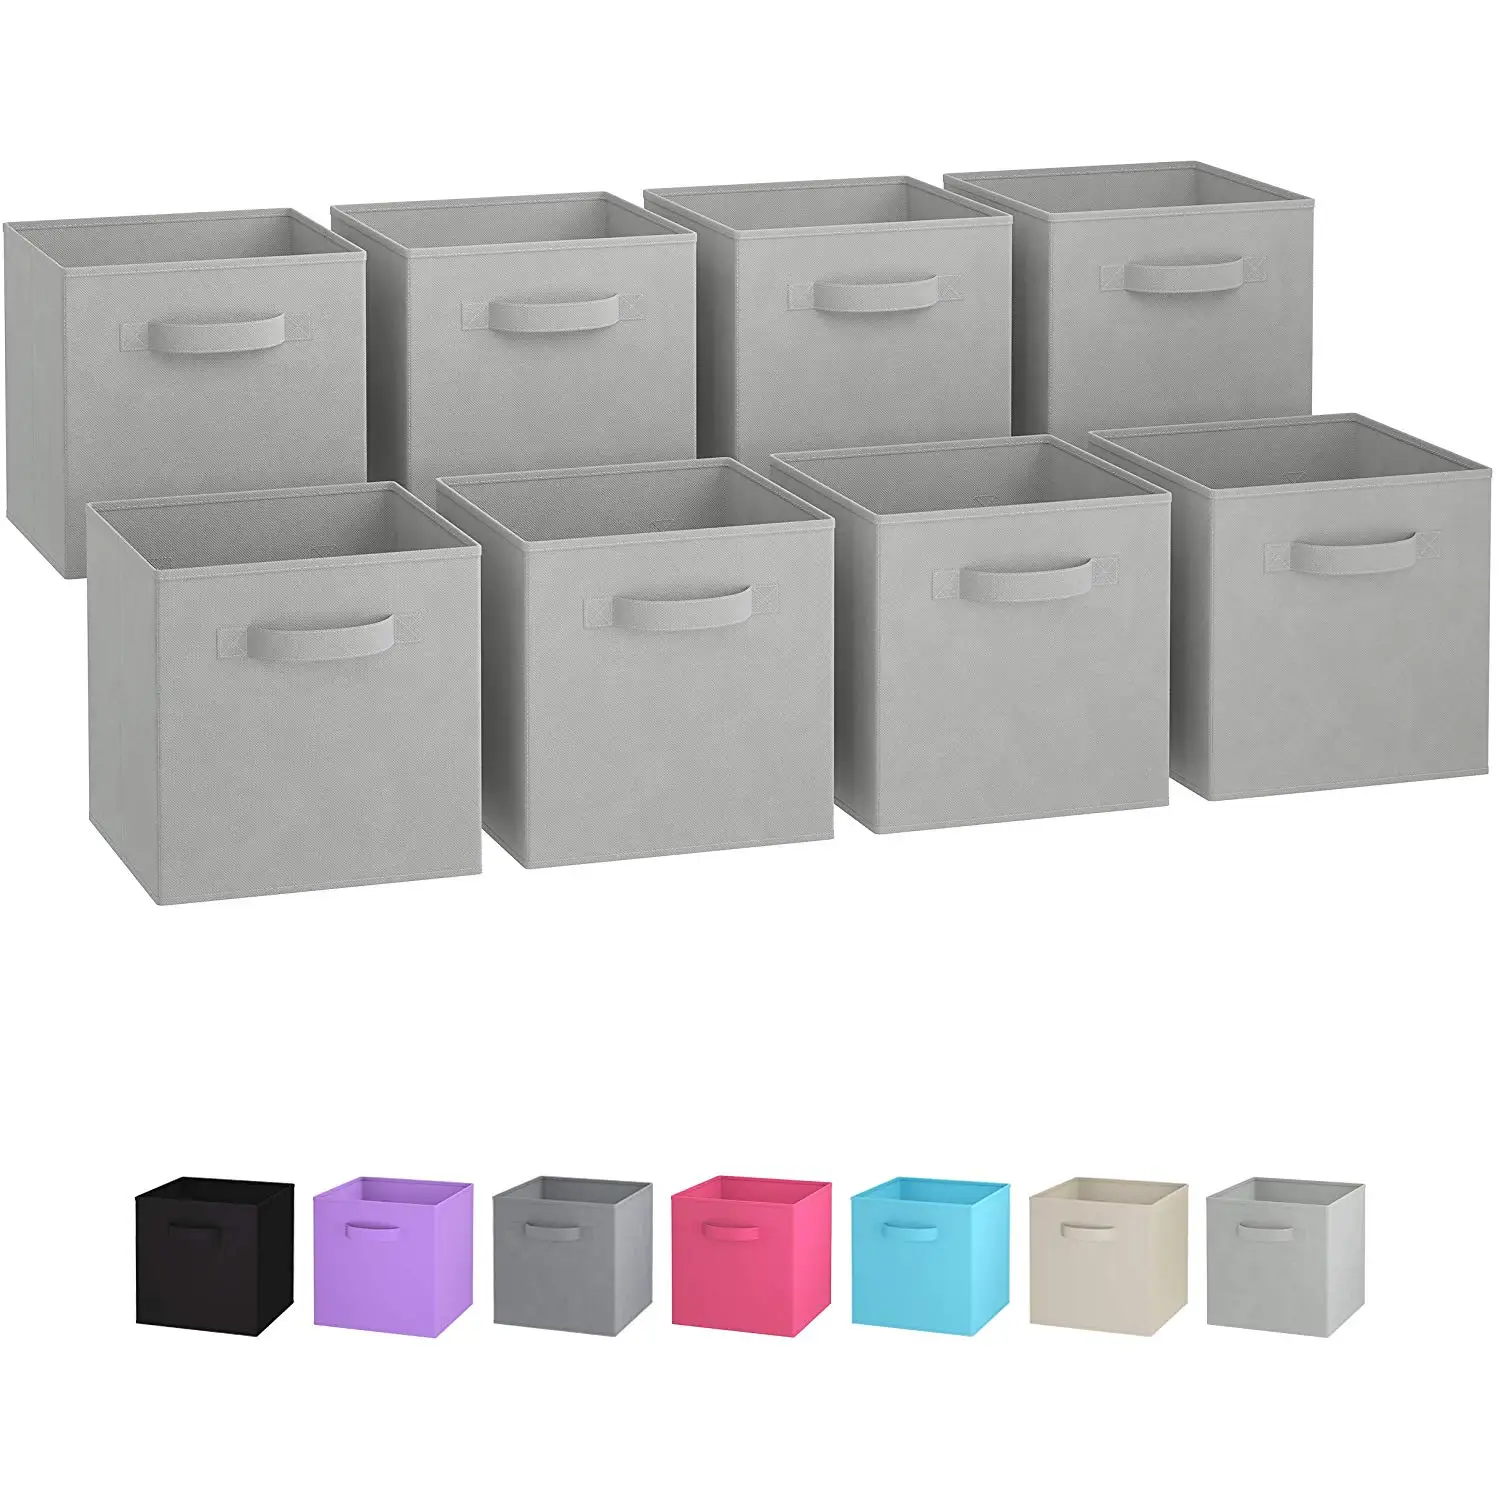 

Durable Kids Toys Clothes Collapsible Foldable Fabric Cube Storage Boxes For Shelf, White, black, grey, red, blue and so on